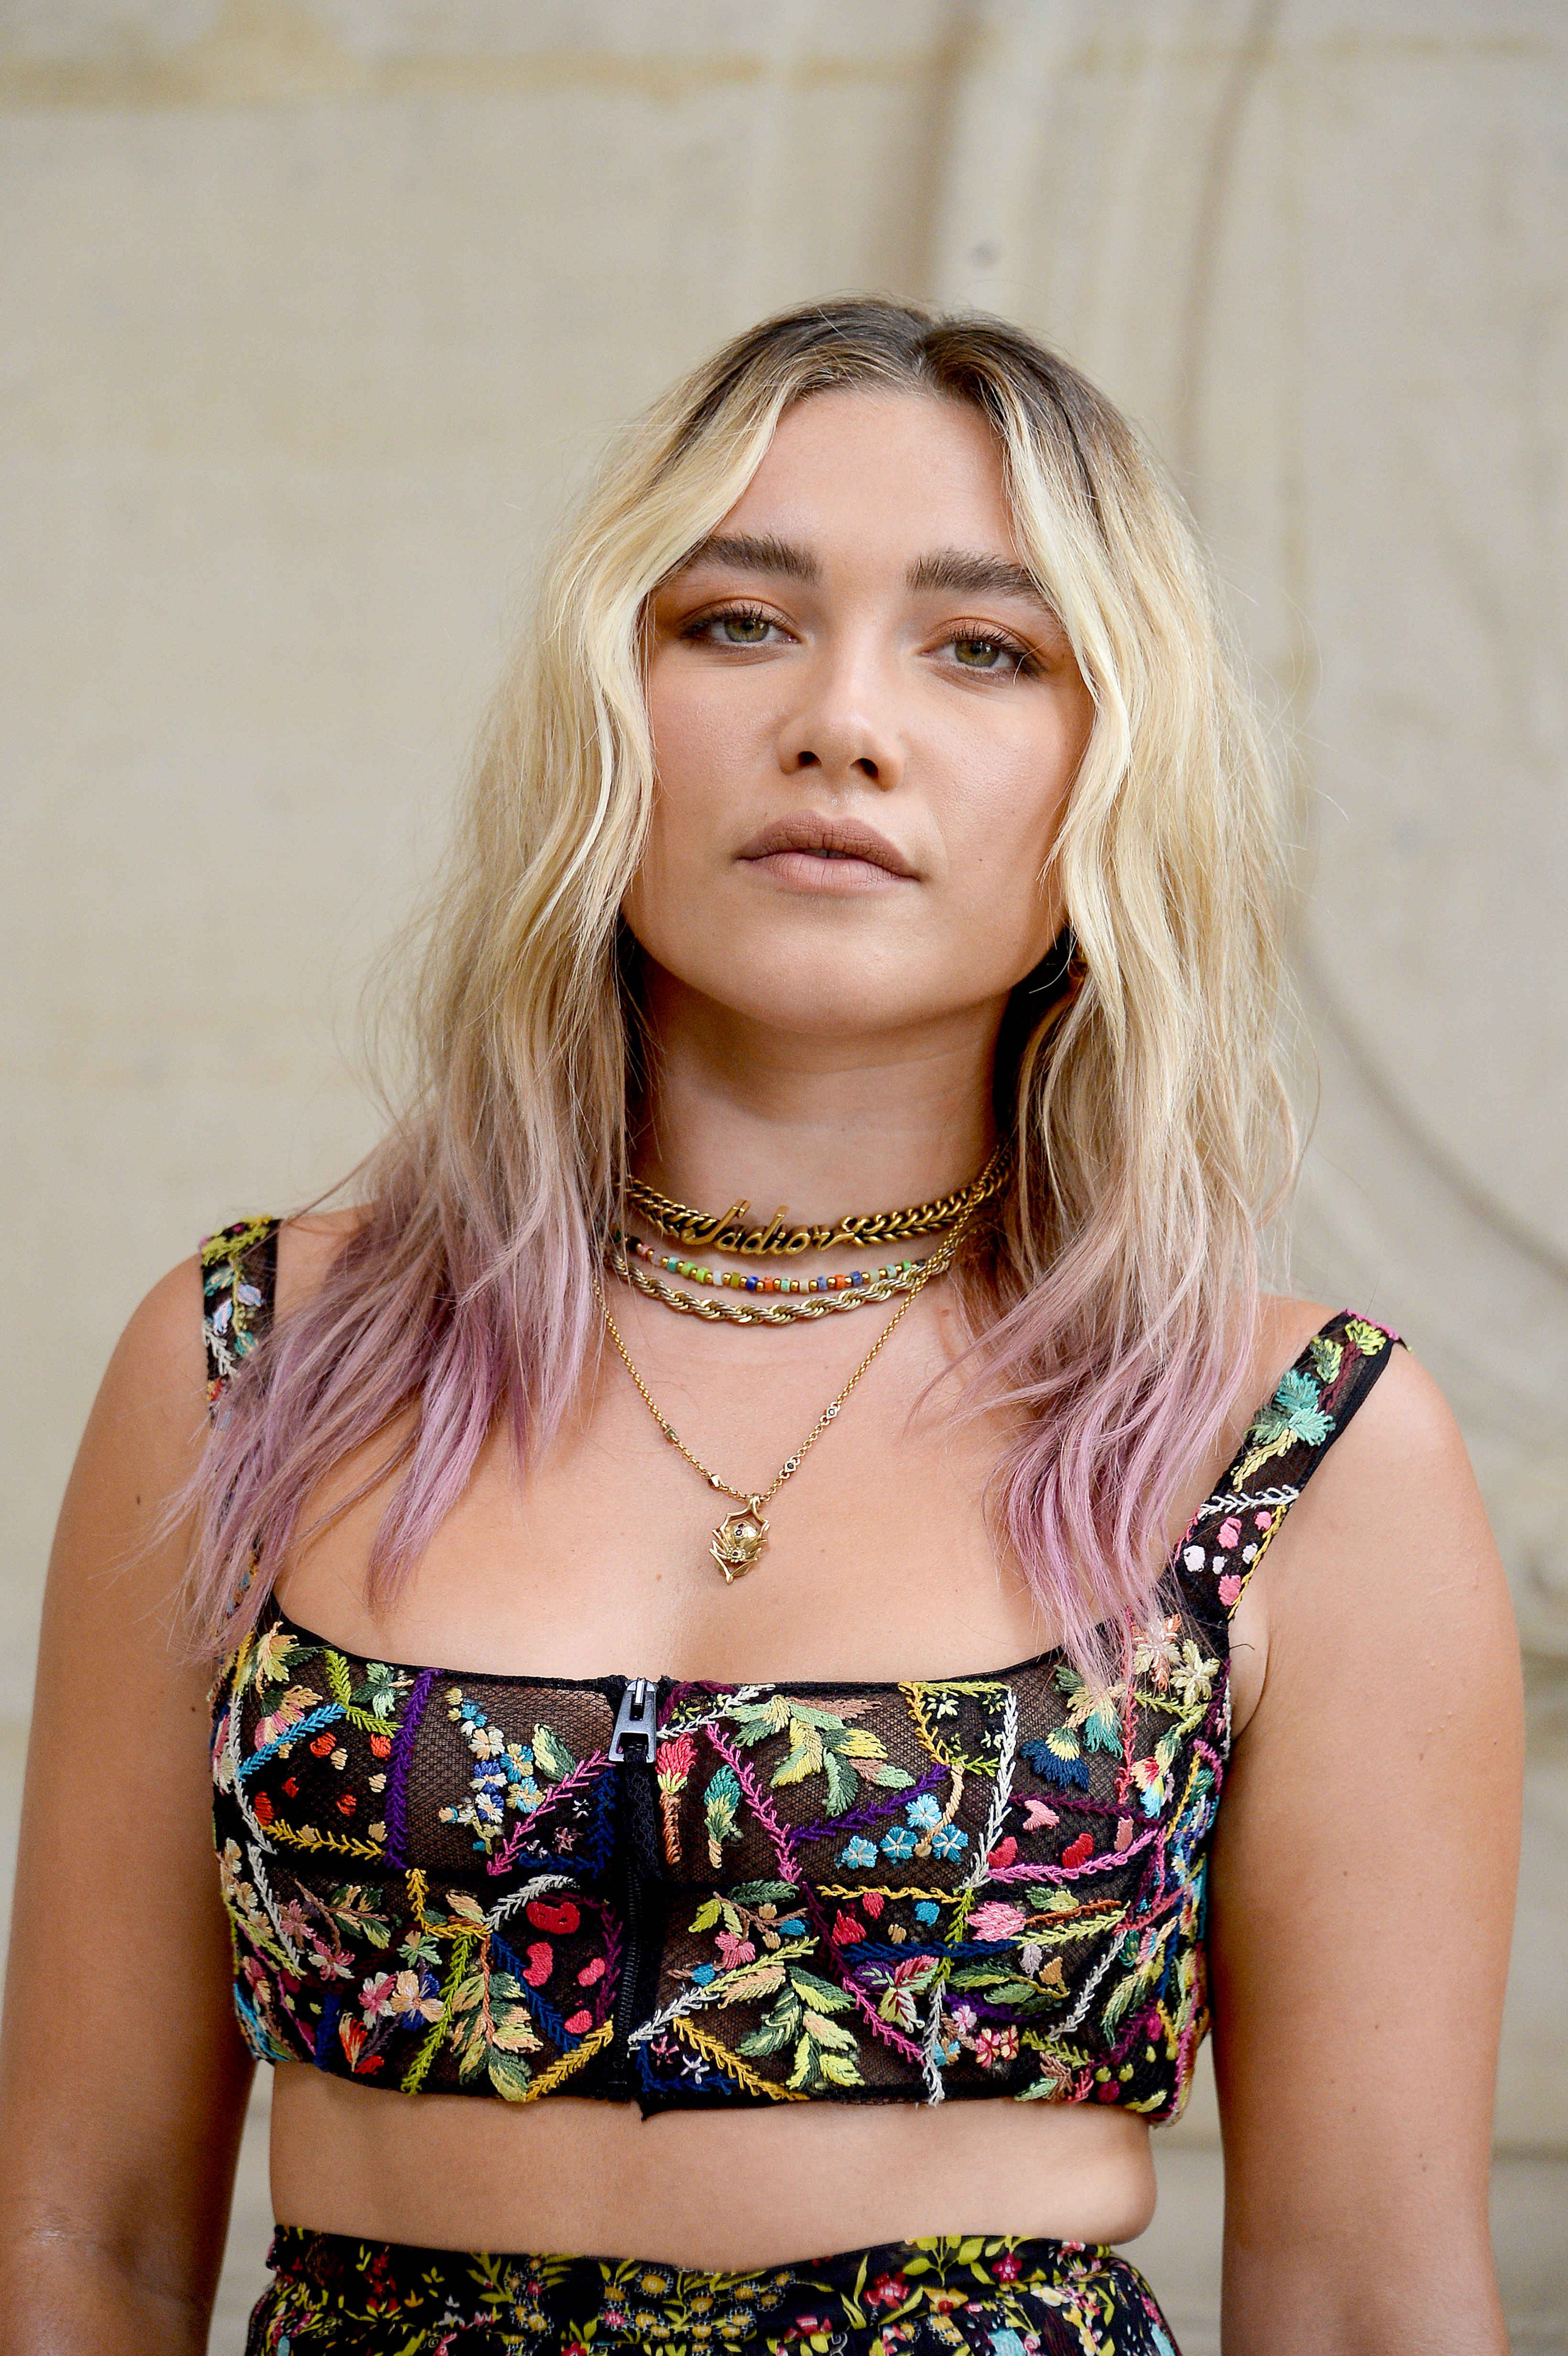 Florence Pugh attends the Christian Dior Haute Couture Fall/Winter 2021/2022 show as part of Paris Fashion Week on July 05, 2021 in Paris, France